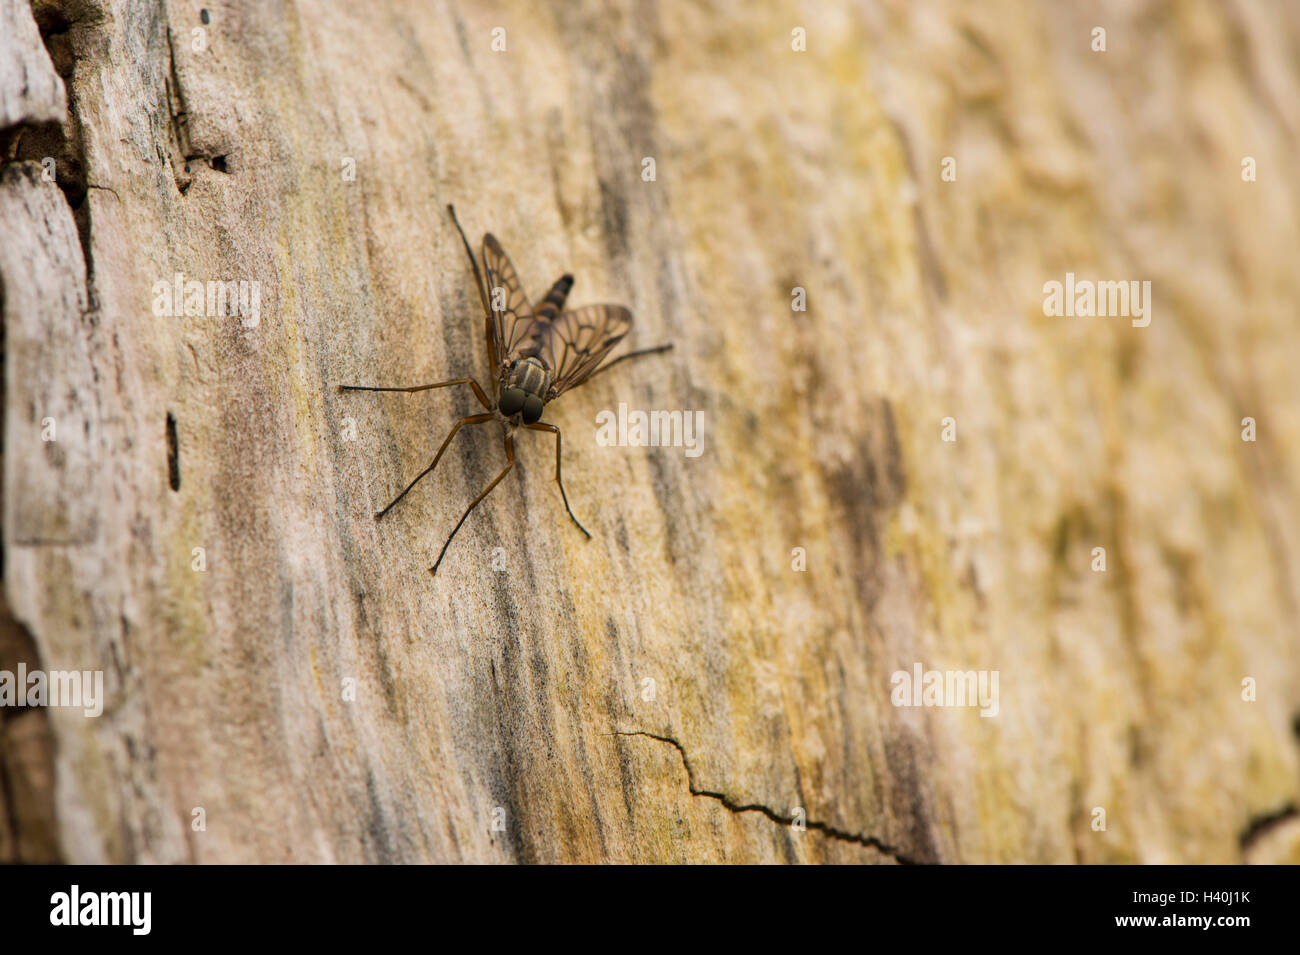 Resting on tree bark, a single male downlooker snipe-fly with delicate wings and large, compound eyes - close-up view. Stock Photo